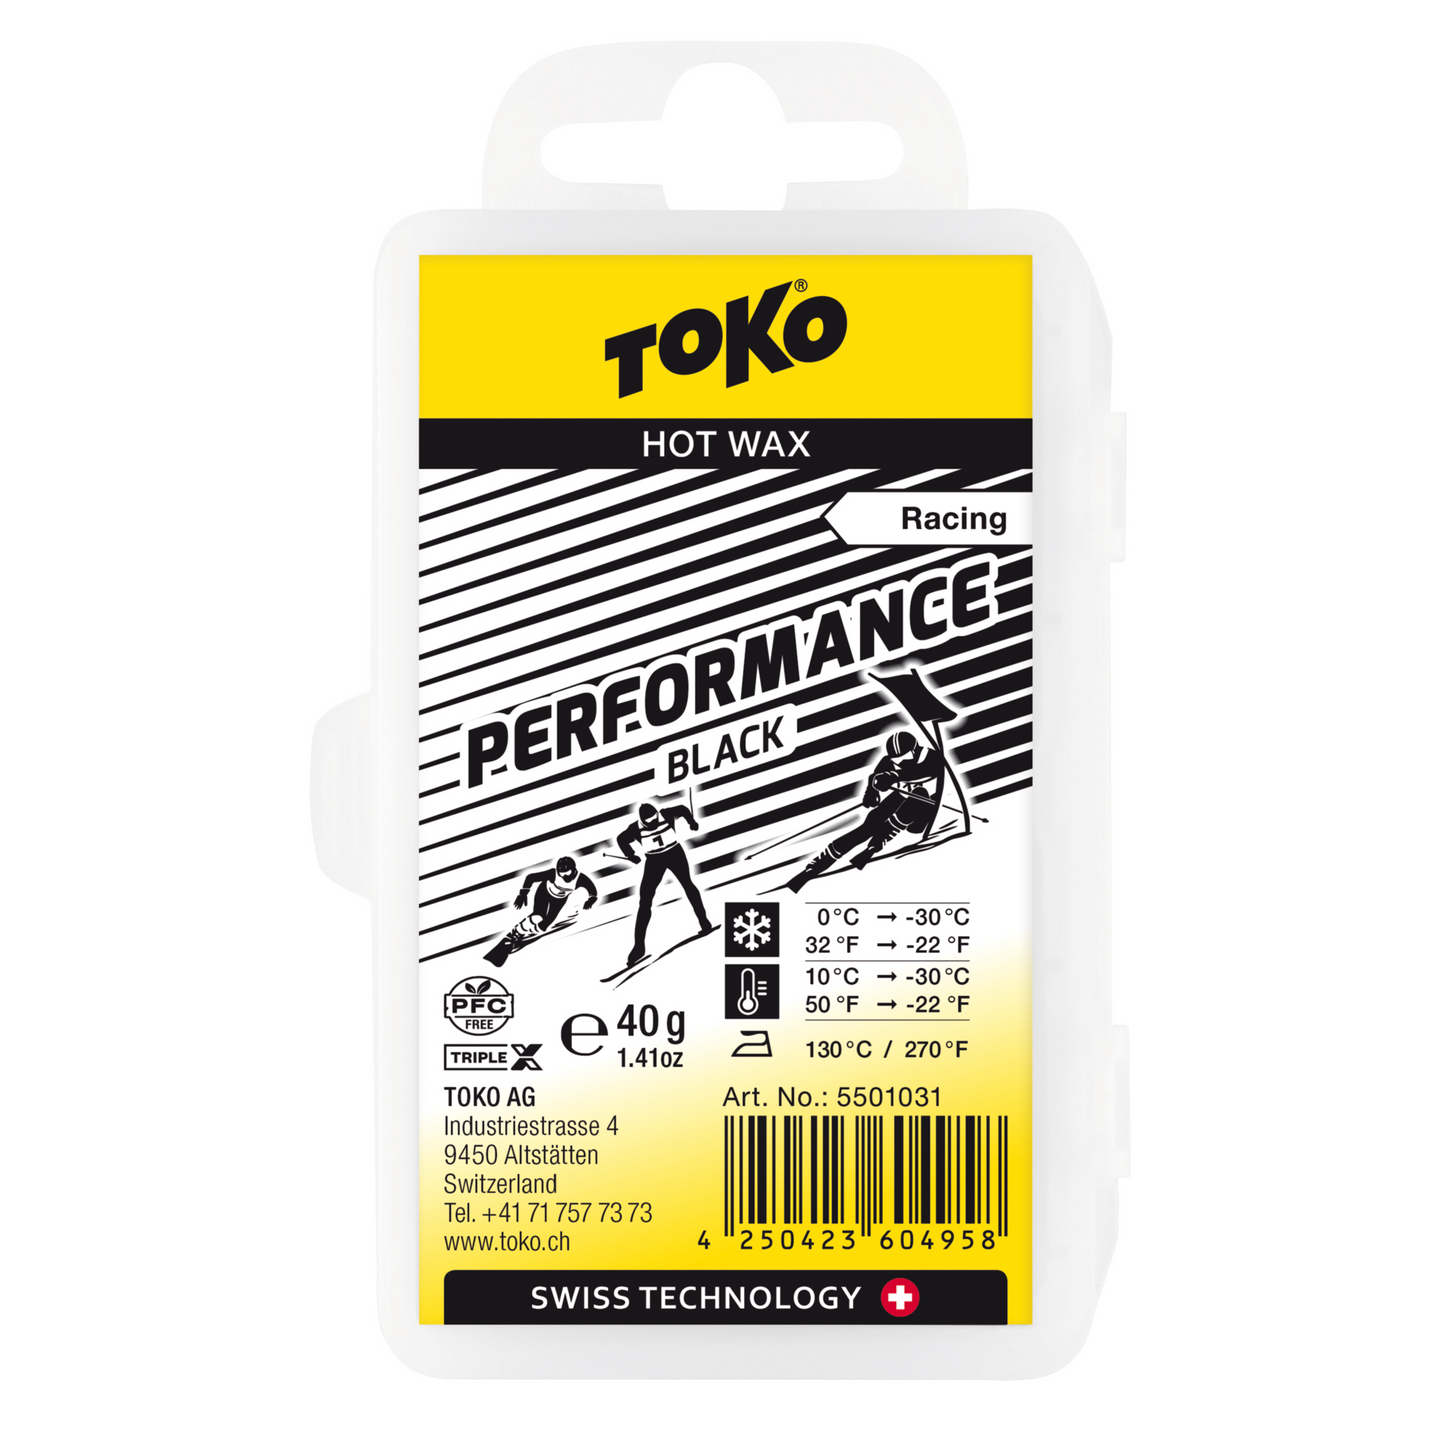 A product picture of the Toko Performance Black Paraffin Melt Wax